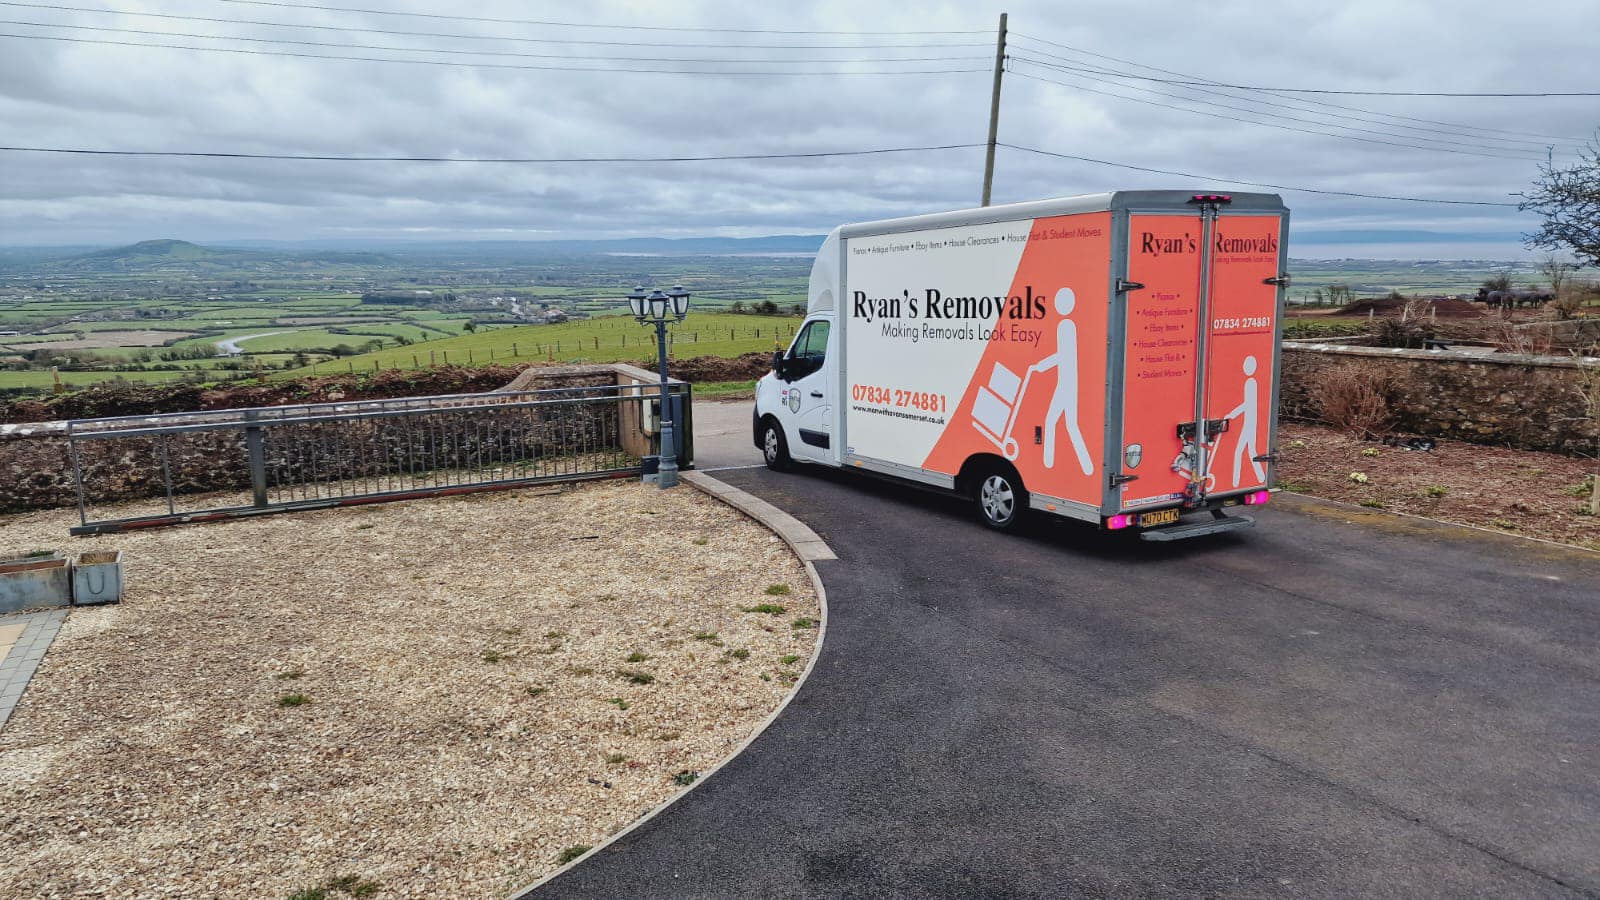 Ryan's removals somerset man and van Movers in Weston-super-Mare